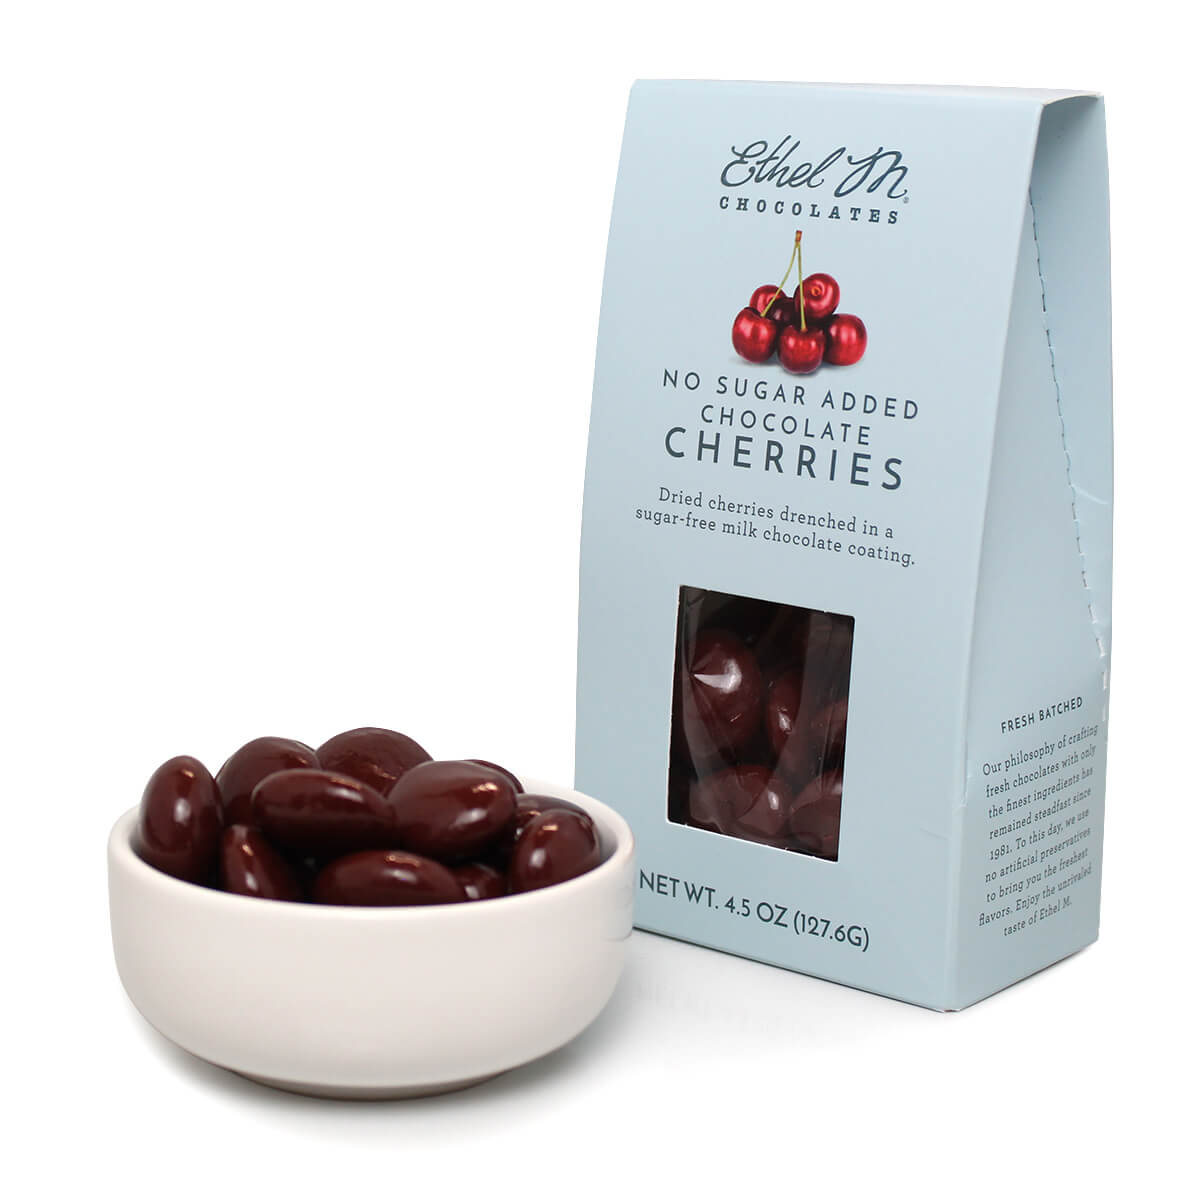 Enjoy and Savor Ethel M Chocolates Sweet Dried Cherries drenched in Sugar-free Milk Chocolate.